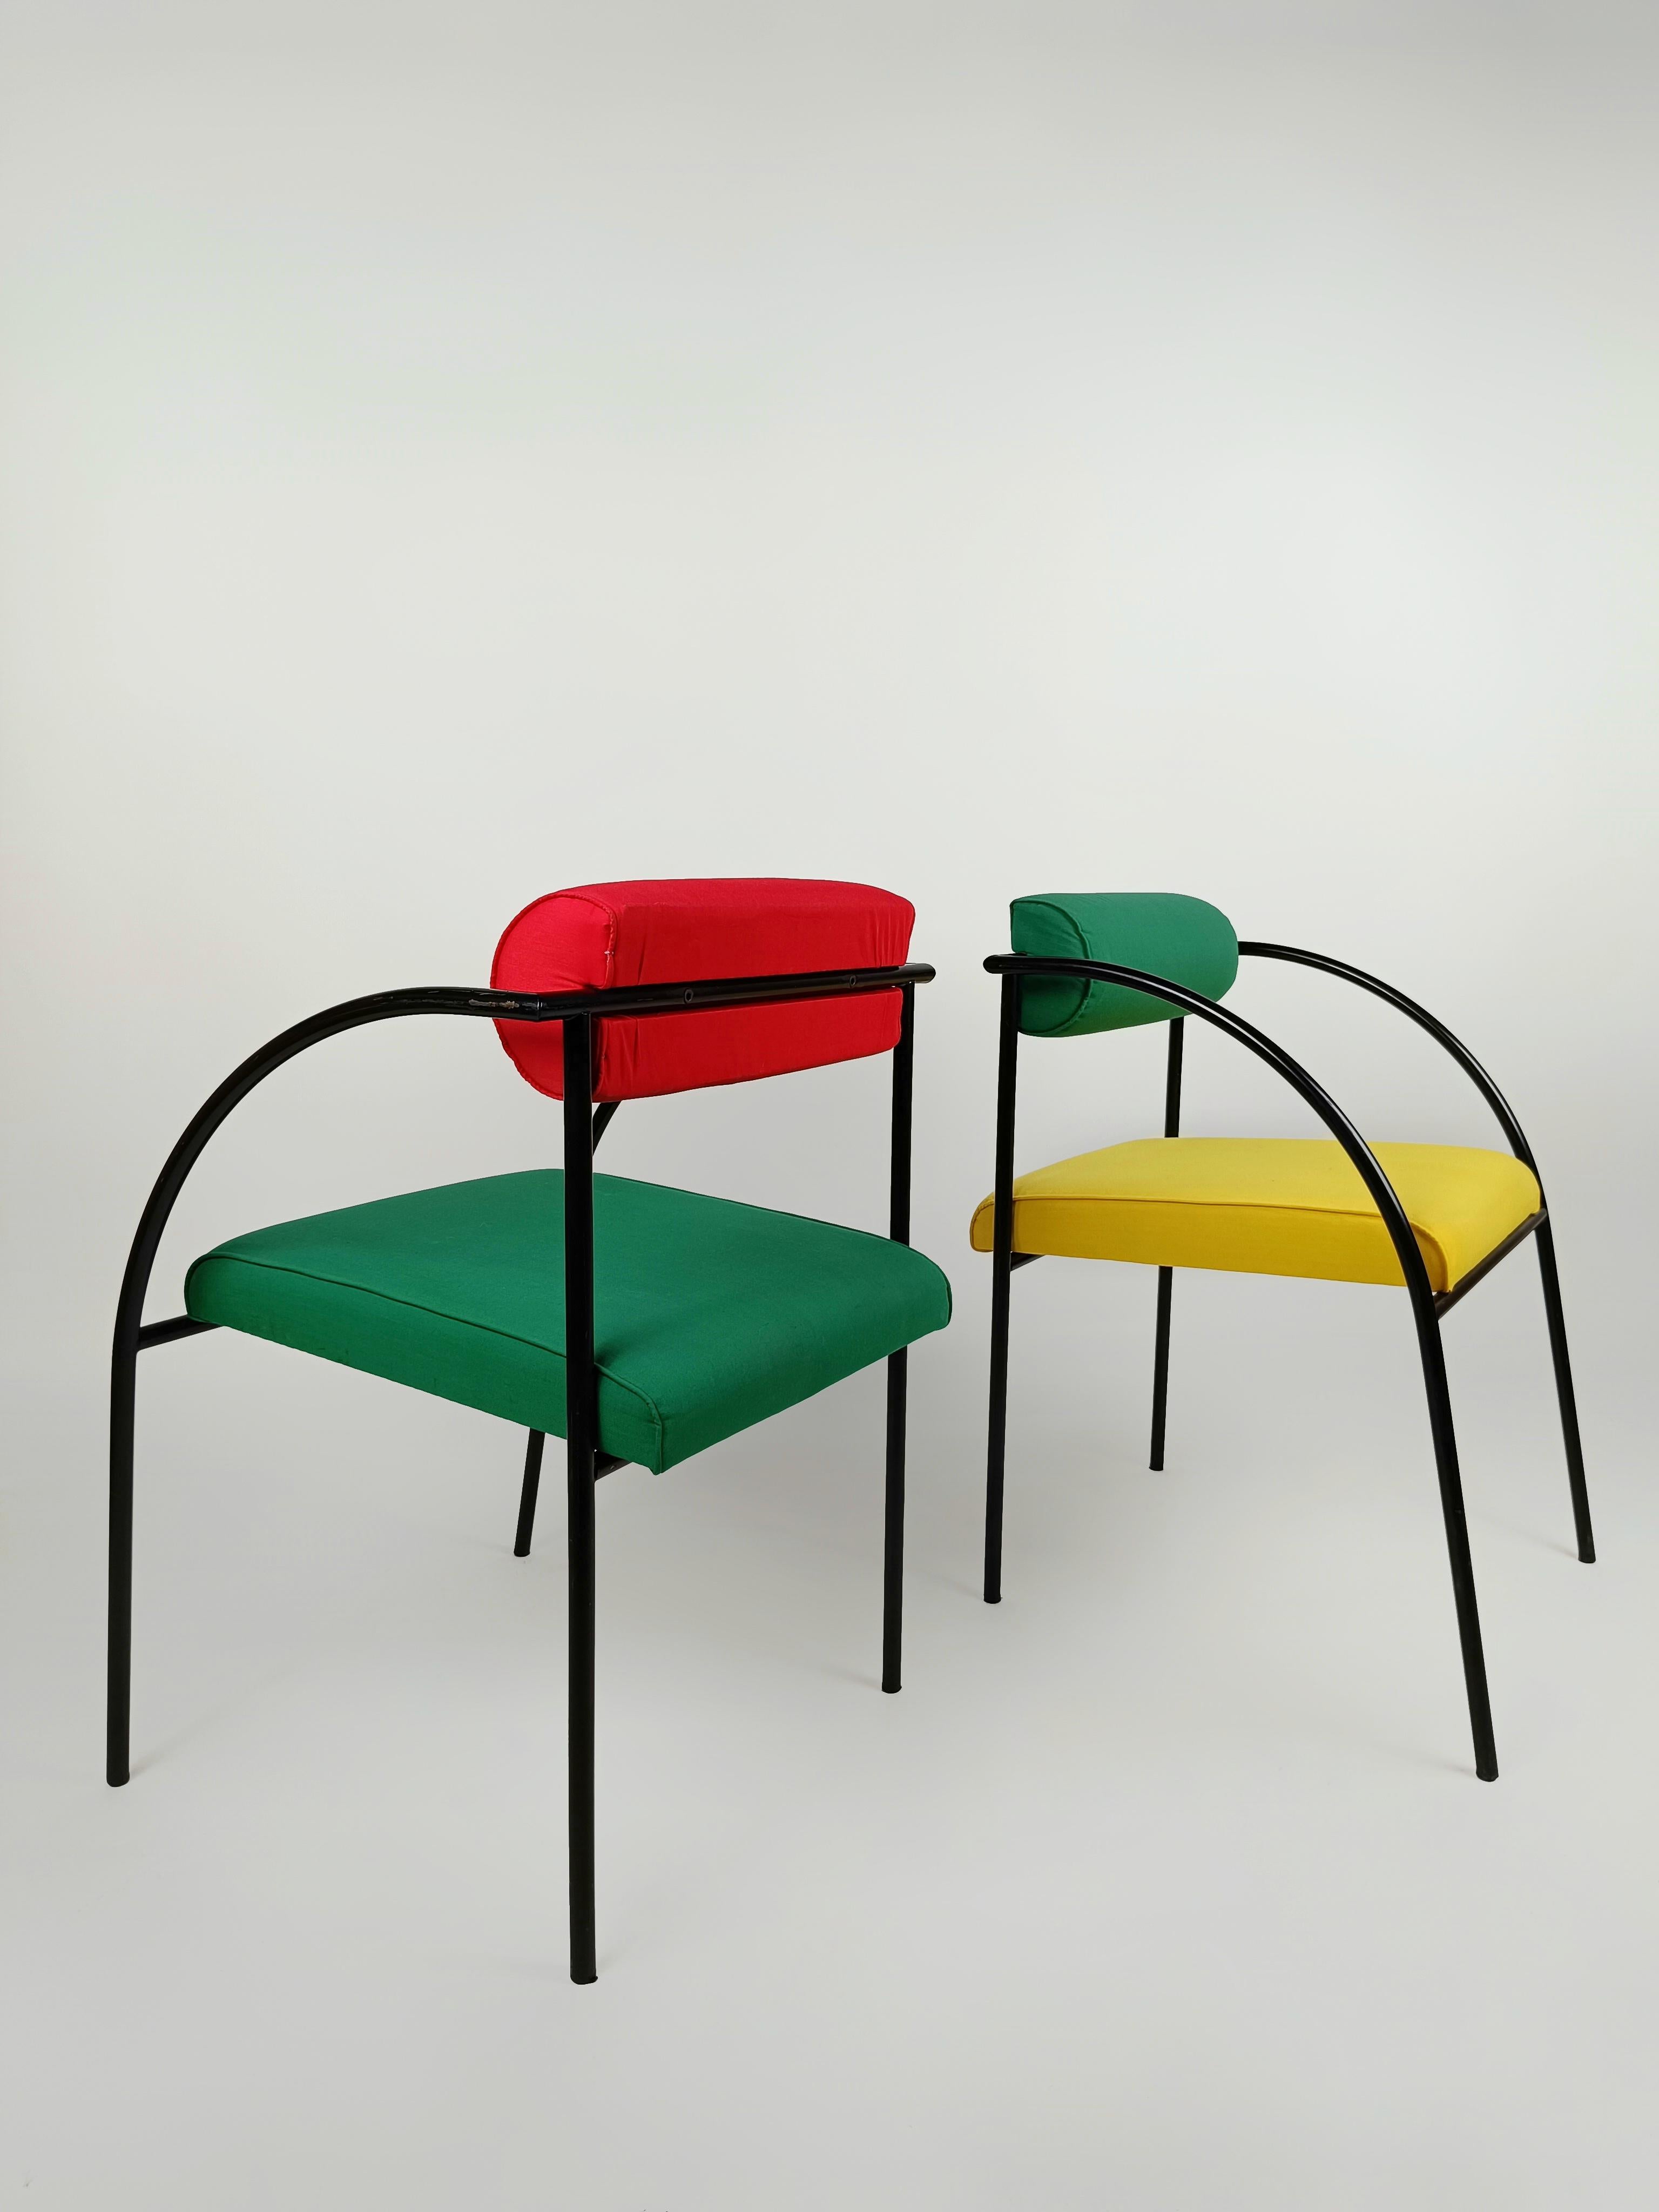 A set of dining, desk or office chairs, in short, perfect for any environment that needs a bit of that 80s magic.
Colour, lightness and light-heartedness is what the cult pieces of 80s design transmit but don't be fooled by the POP colors used by